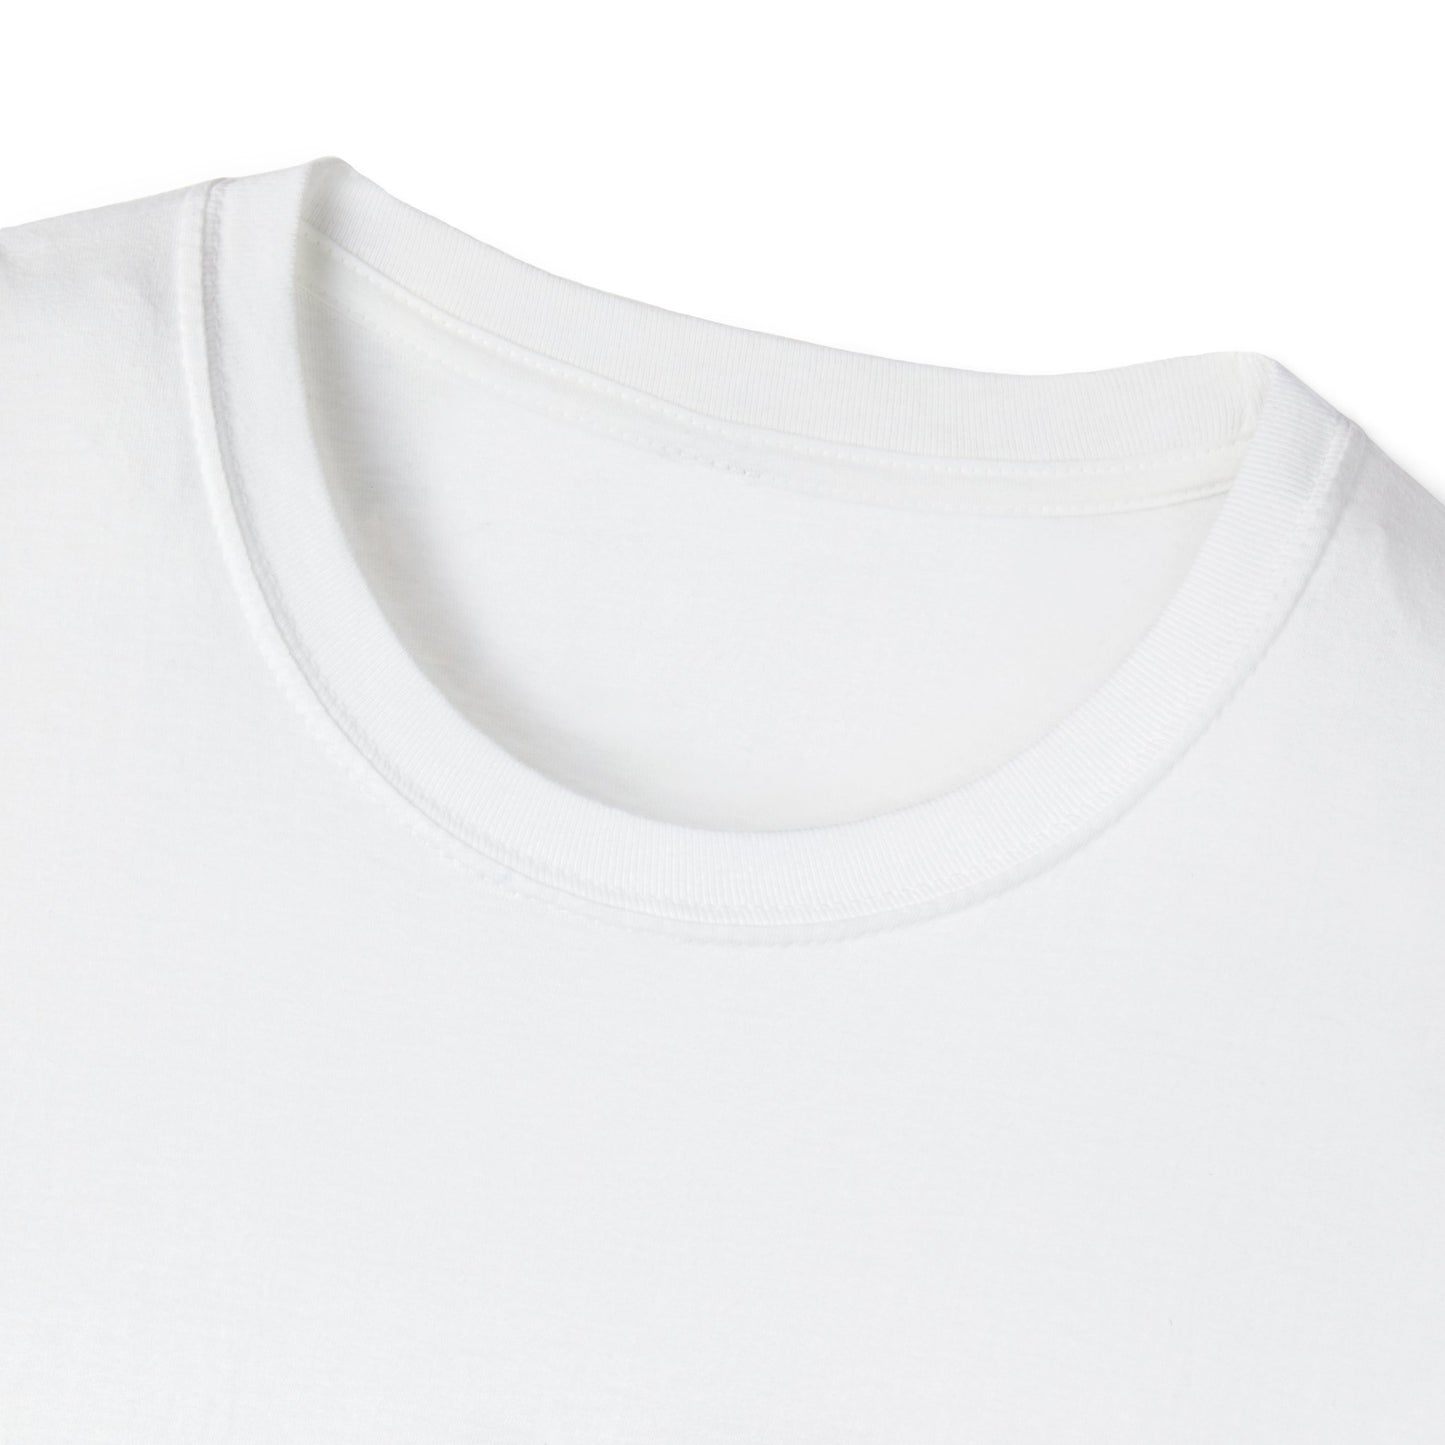 'OSpringer Clothing Co.' Traditional Softstyle T-Shirt